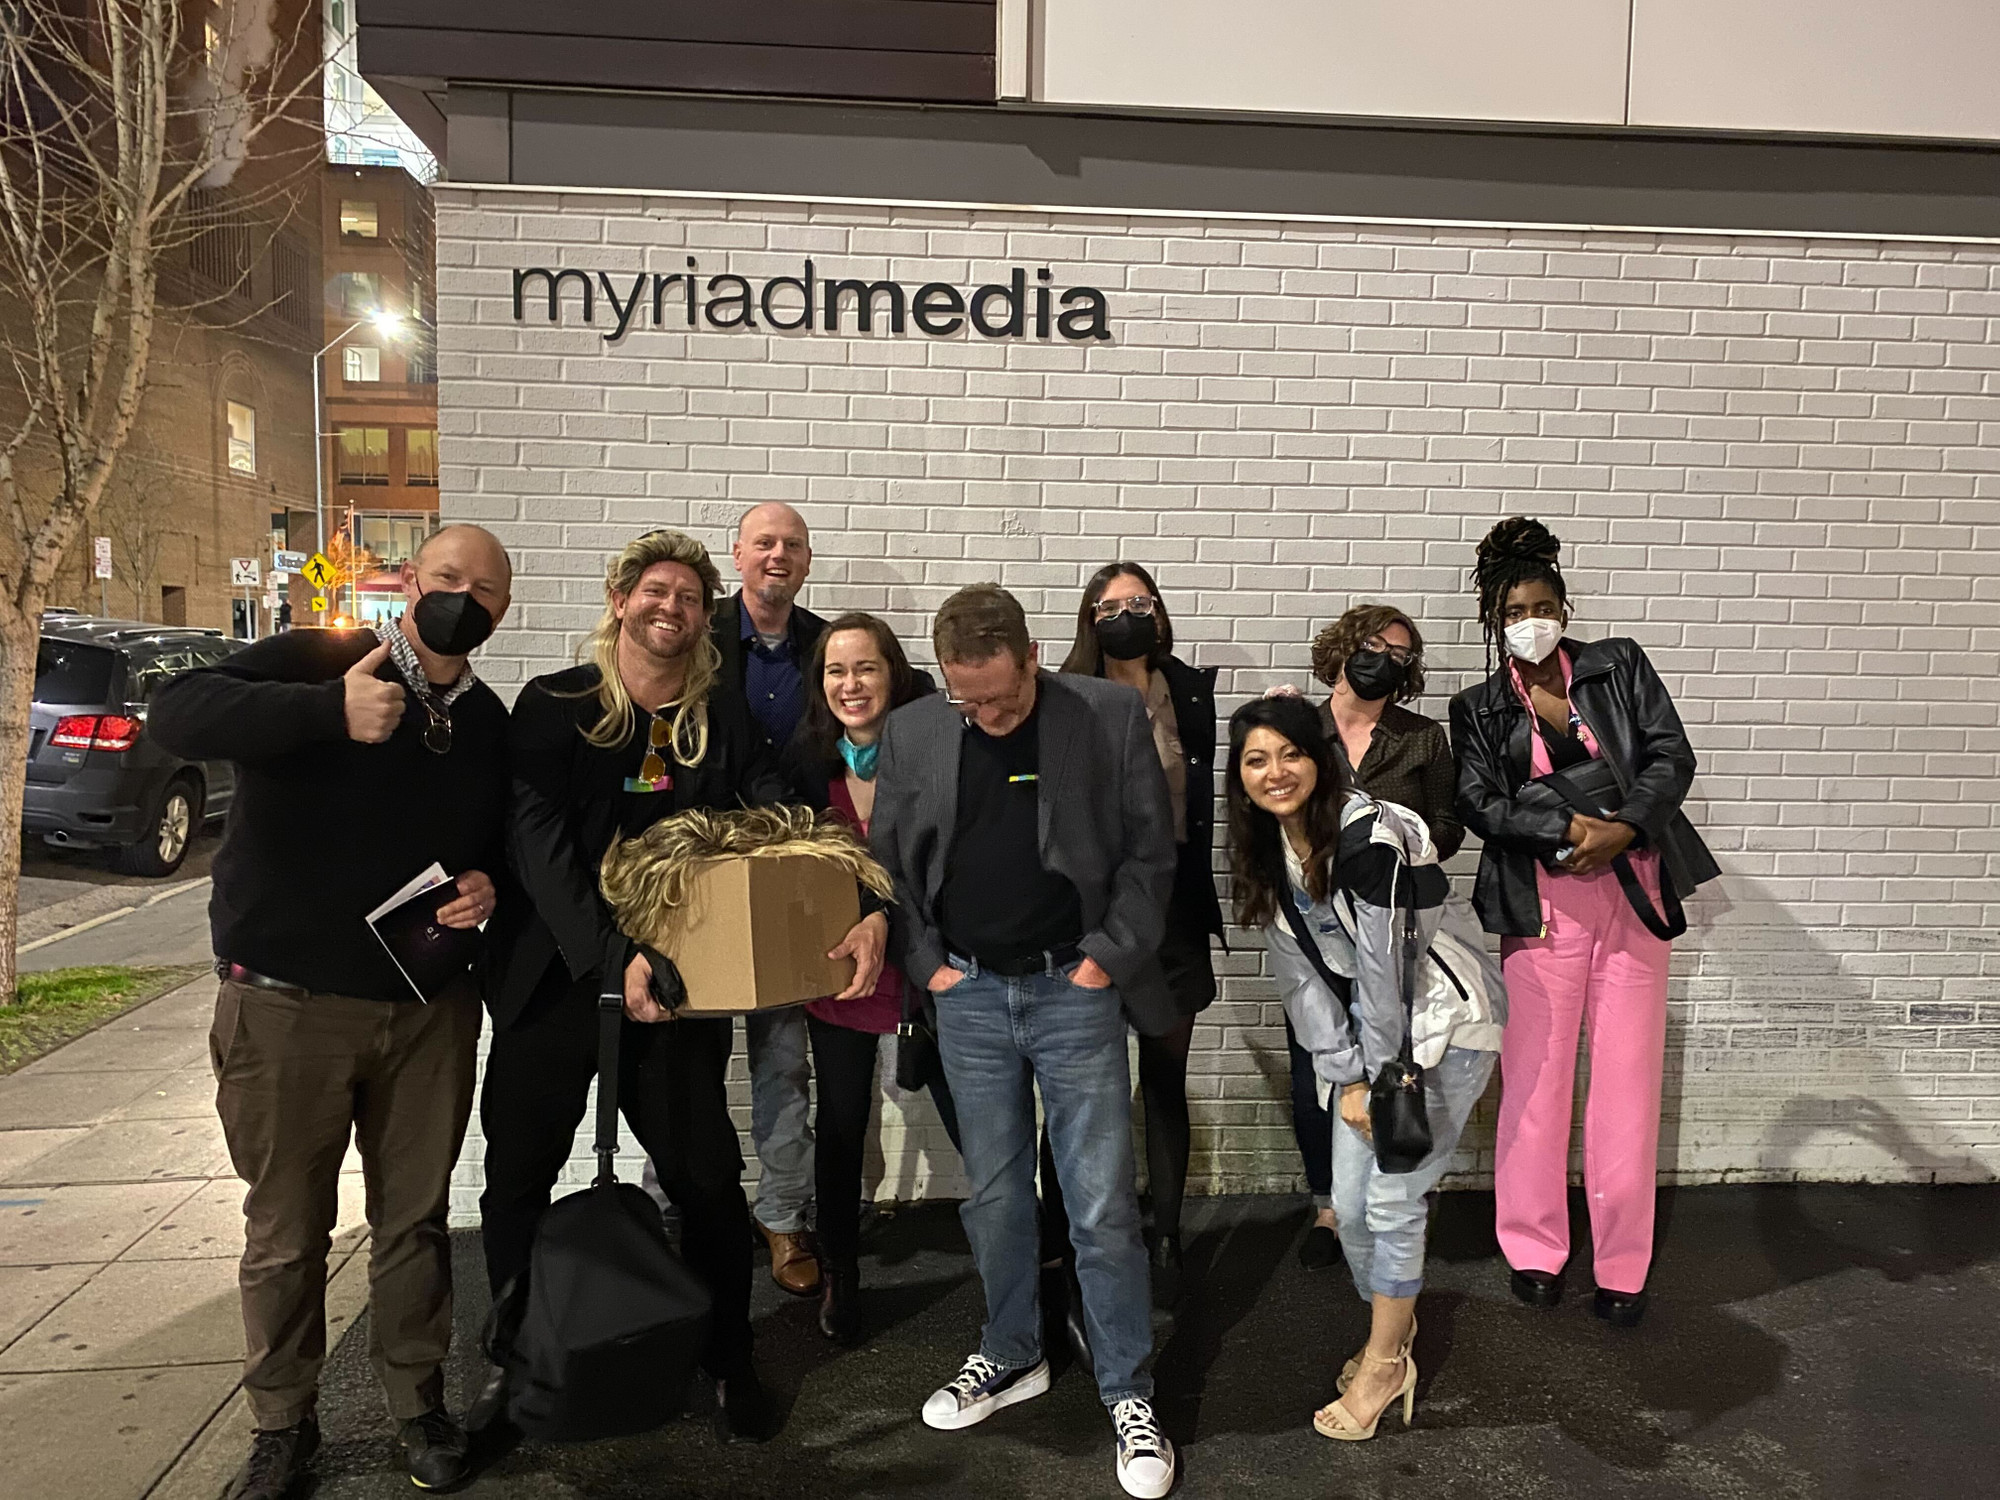 The Myriad team posing for a group photo outside the Myriad studio after winning the Addy Awards